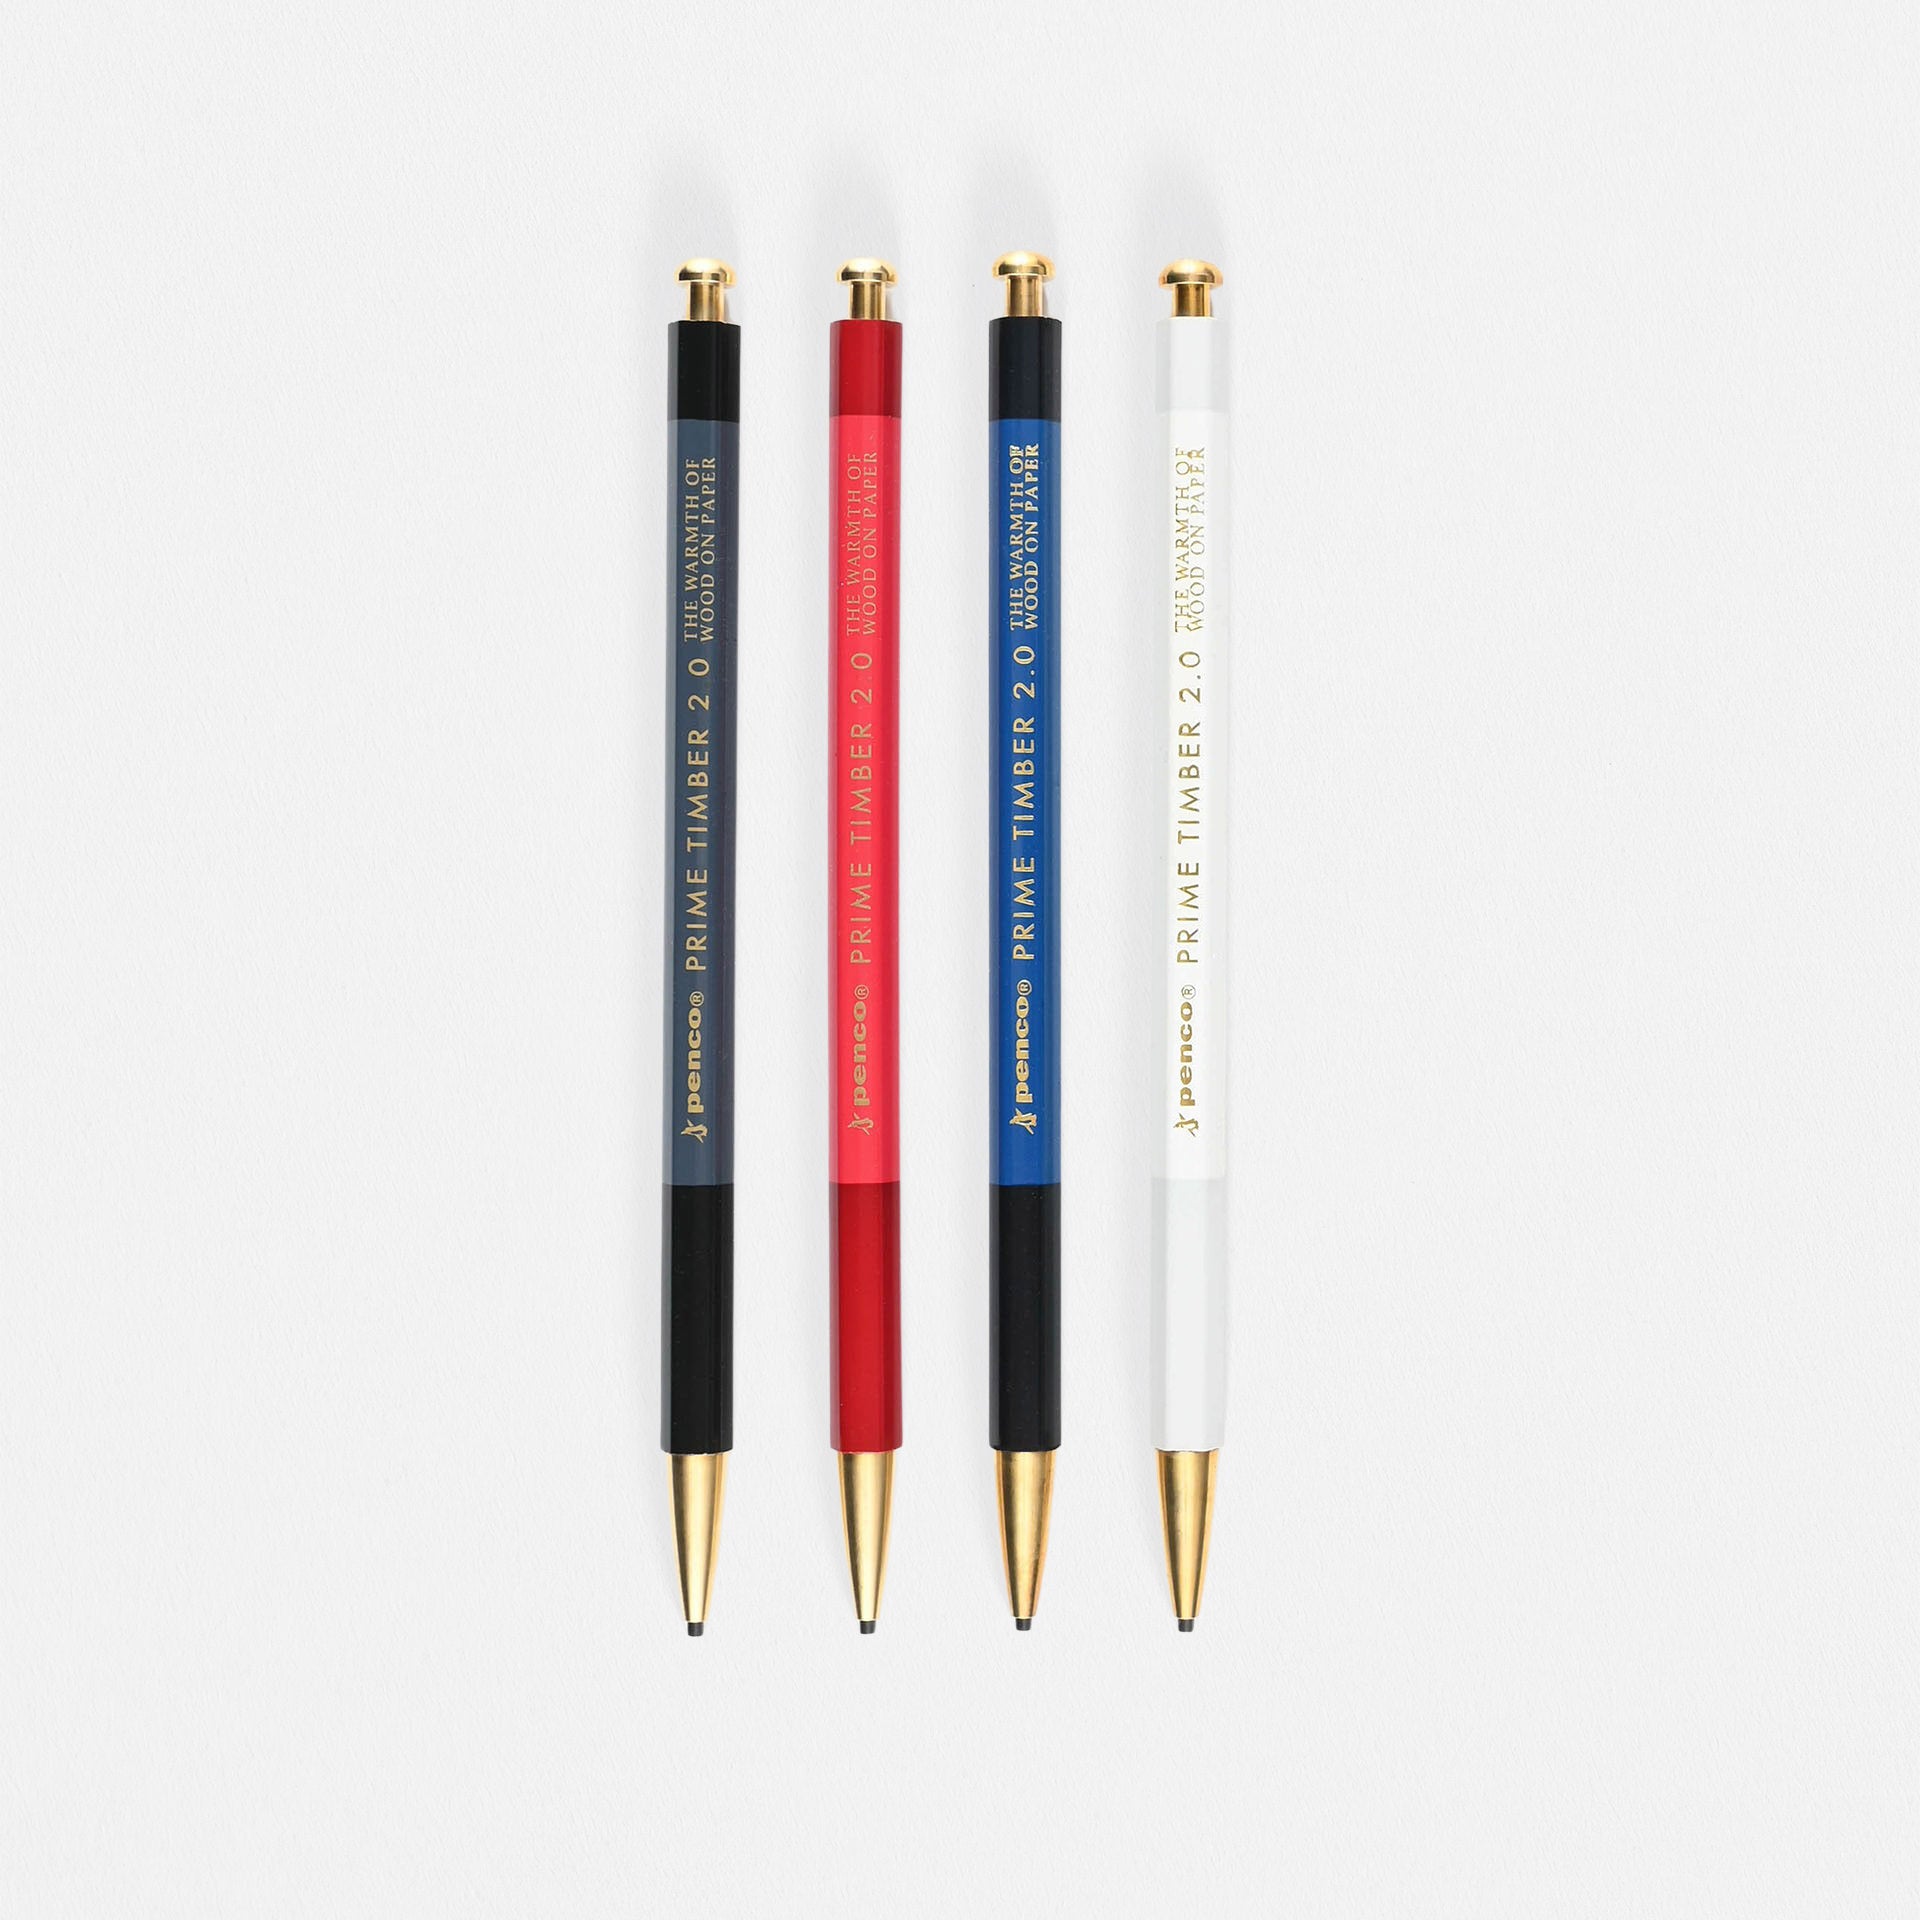 Hightide Penco Prime Timber Brass 2.0 MM Mechanical Pencil | Black, Red, Navy Or White 